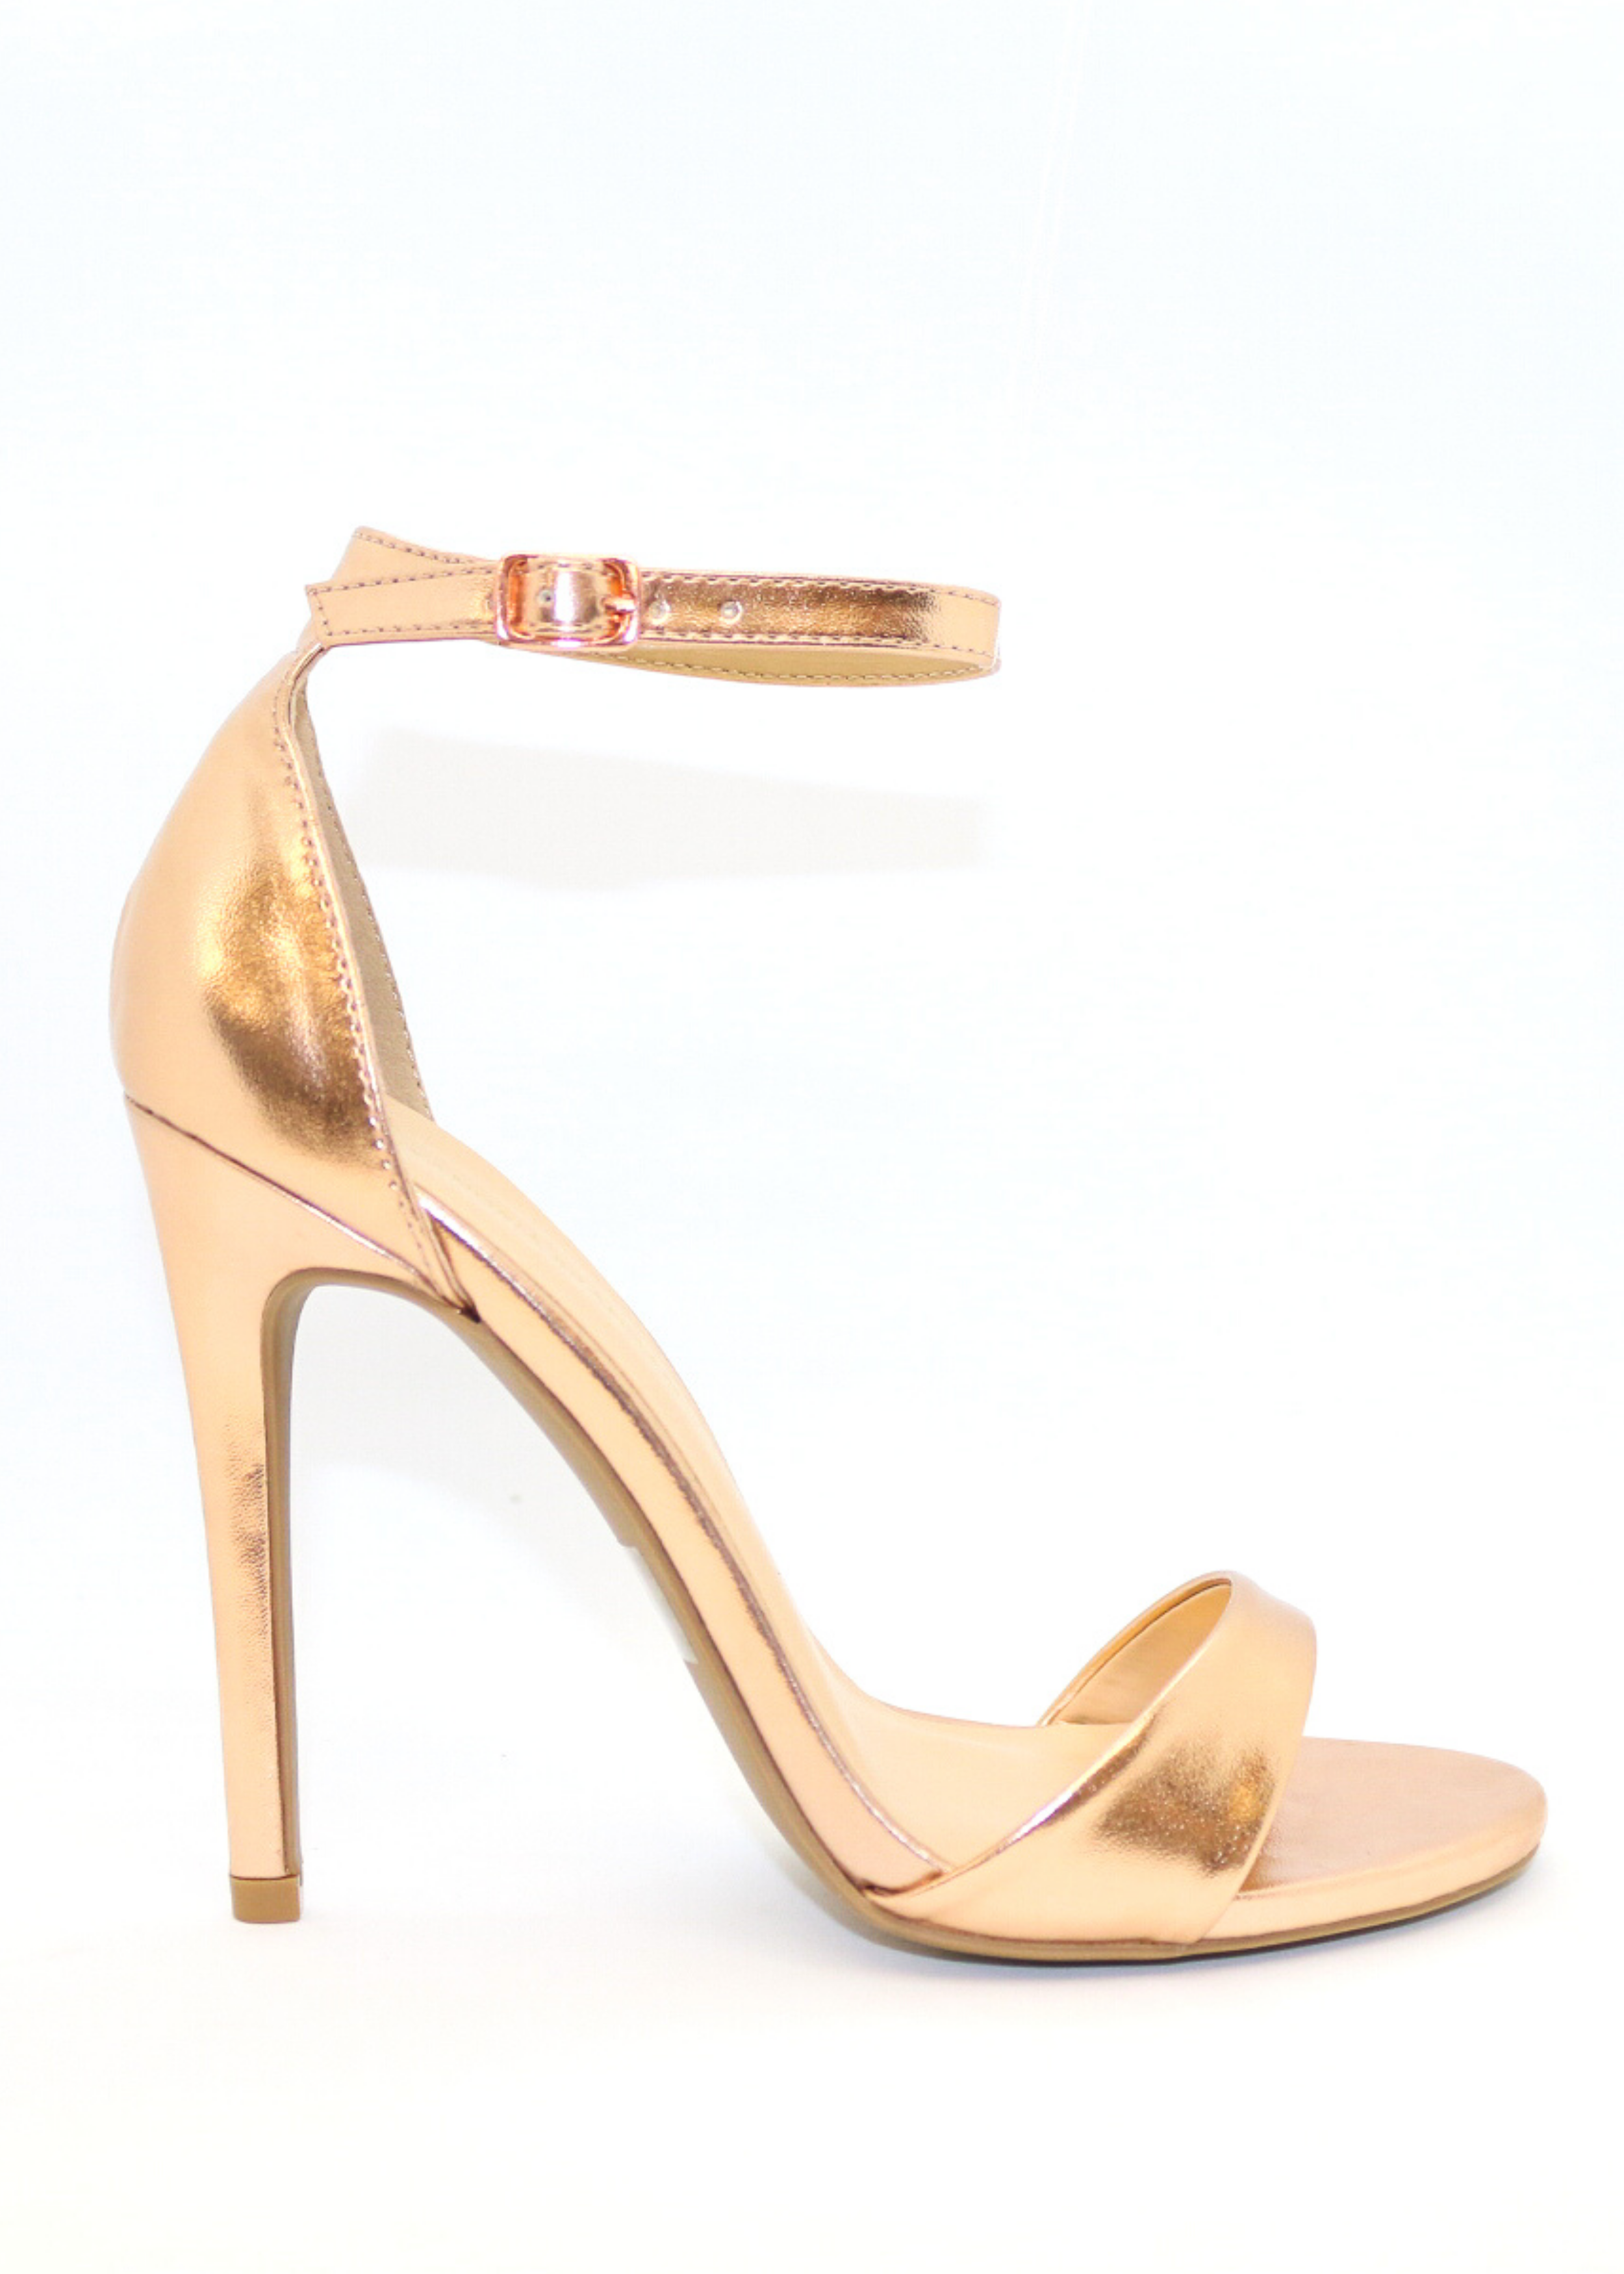 ALI heel in rose gold that is pictured from above and picturing side view and marble top as the background for better view. Ali Heels in rose gold that has a buckle on the ankle and cover heel in the back as well as thick to thin and thick again for secure and comfort.